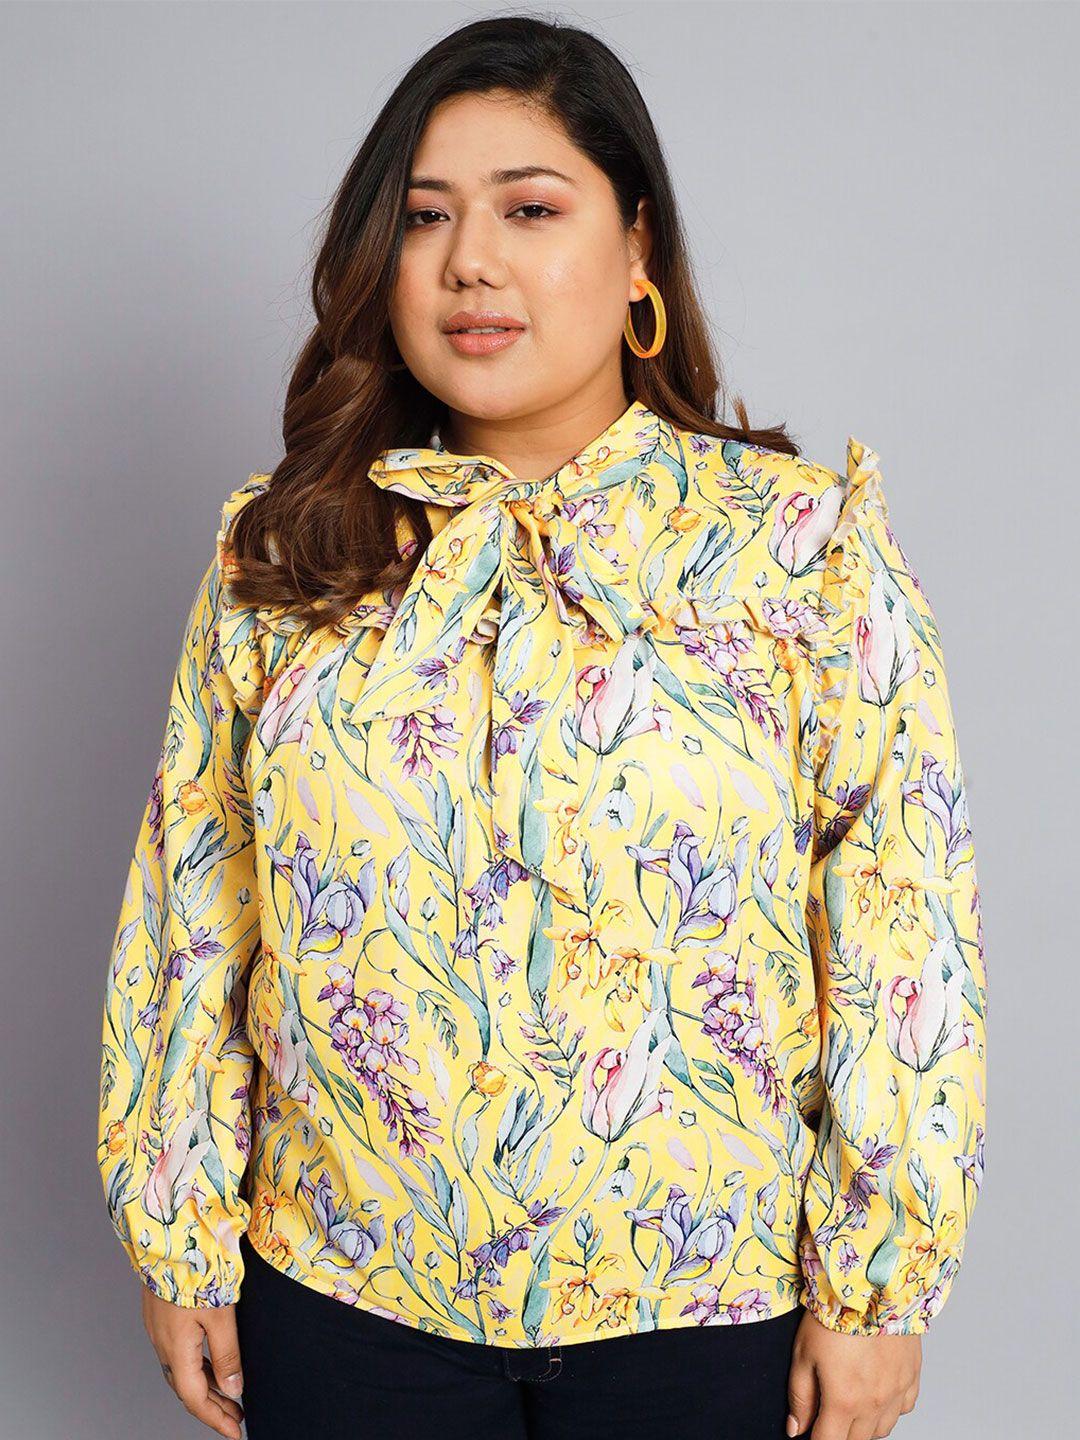 beyound size - the dry state plus size floral printed tie-up neck puff sleeve top